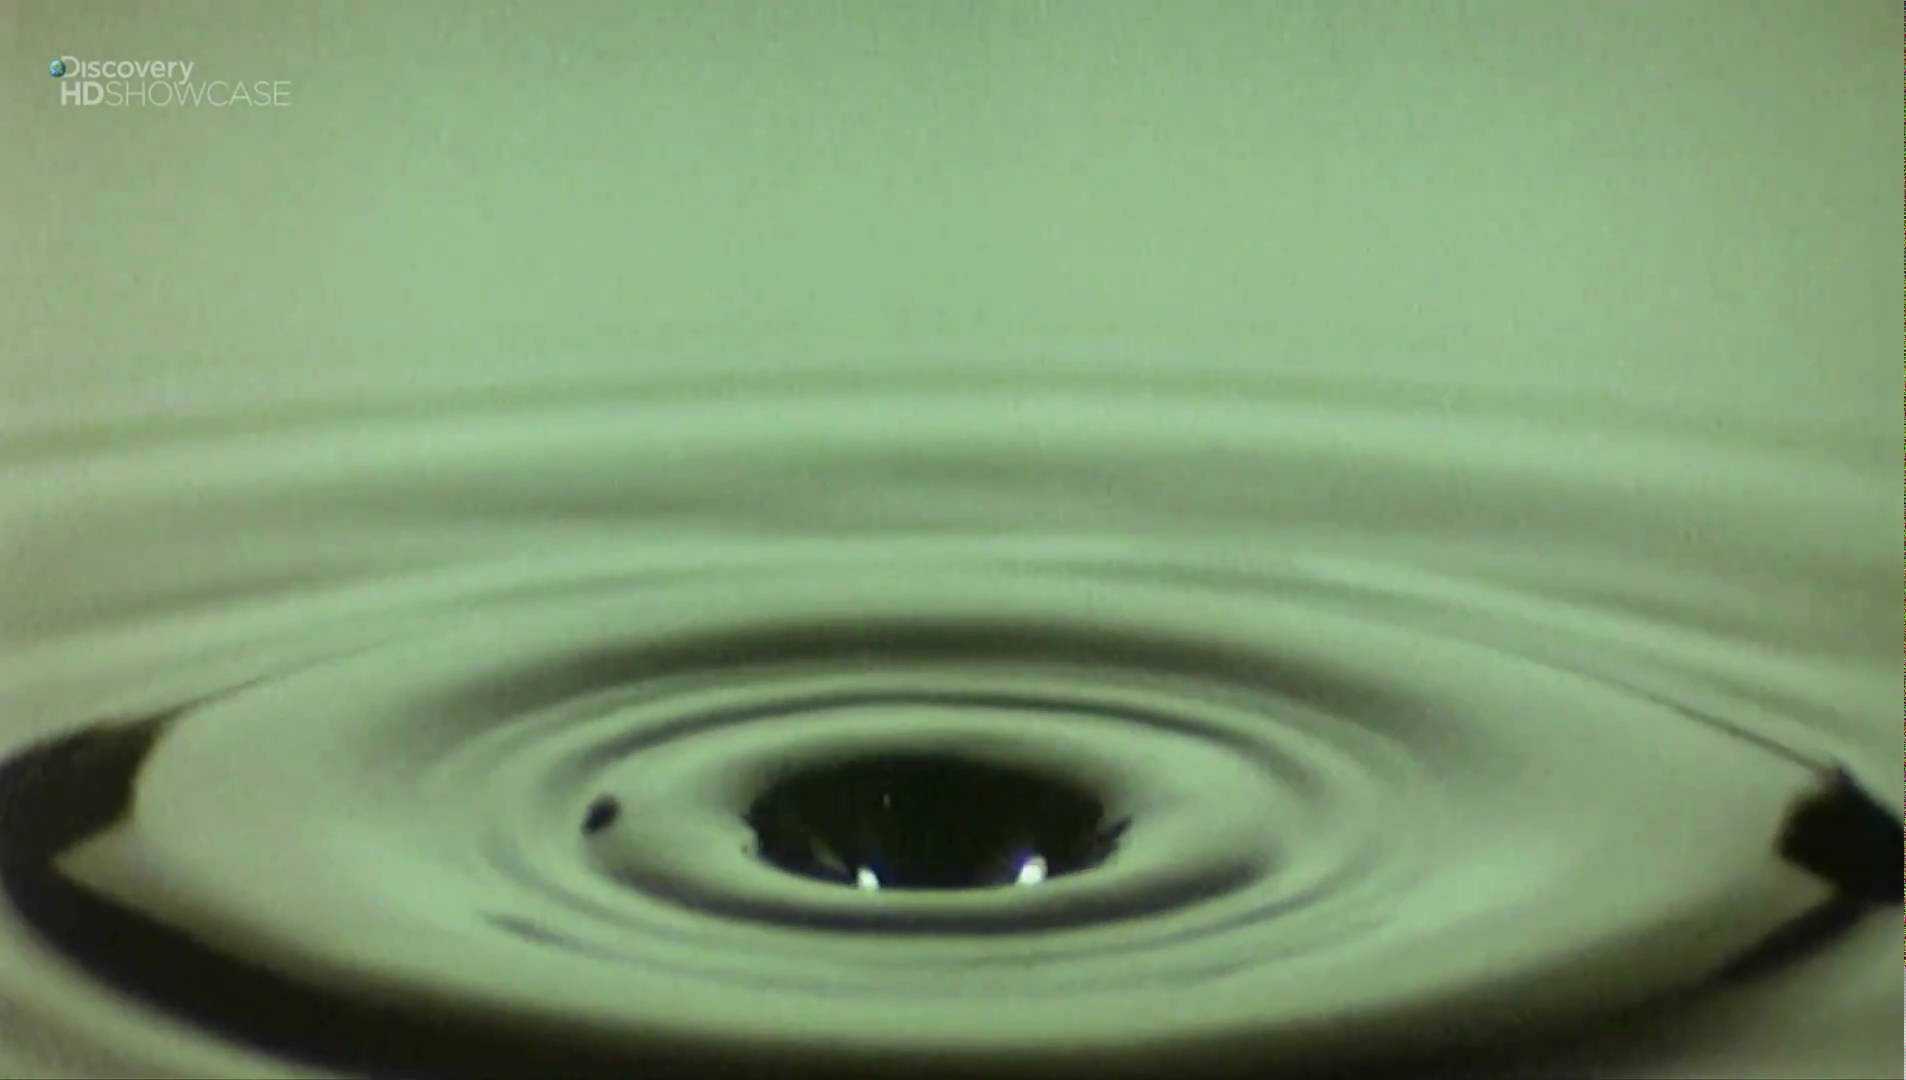 Waterdrop shot in 10000 frames a second - YouTube